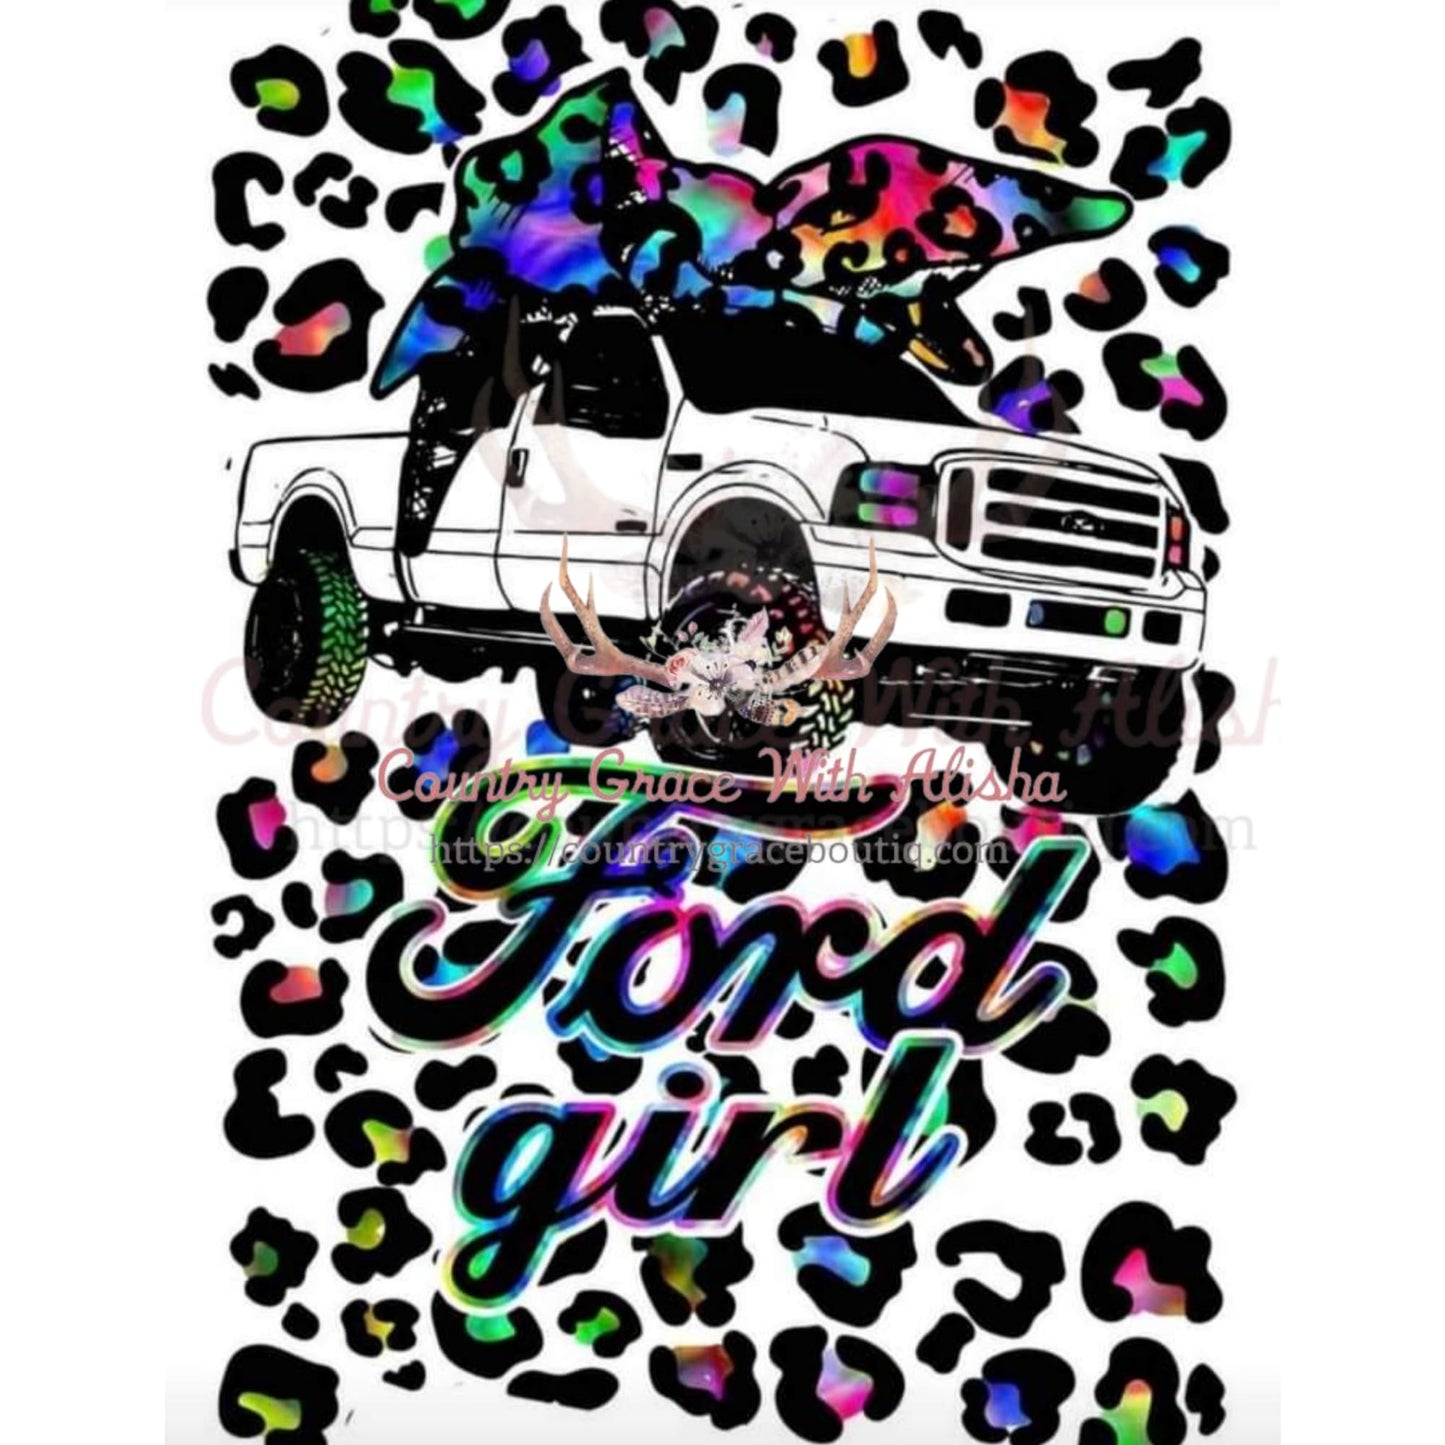 Ford Girl Sublimation Transfer - Sub $1.50 Country Grace 